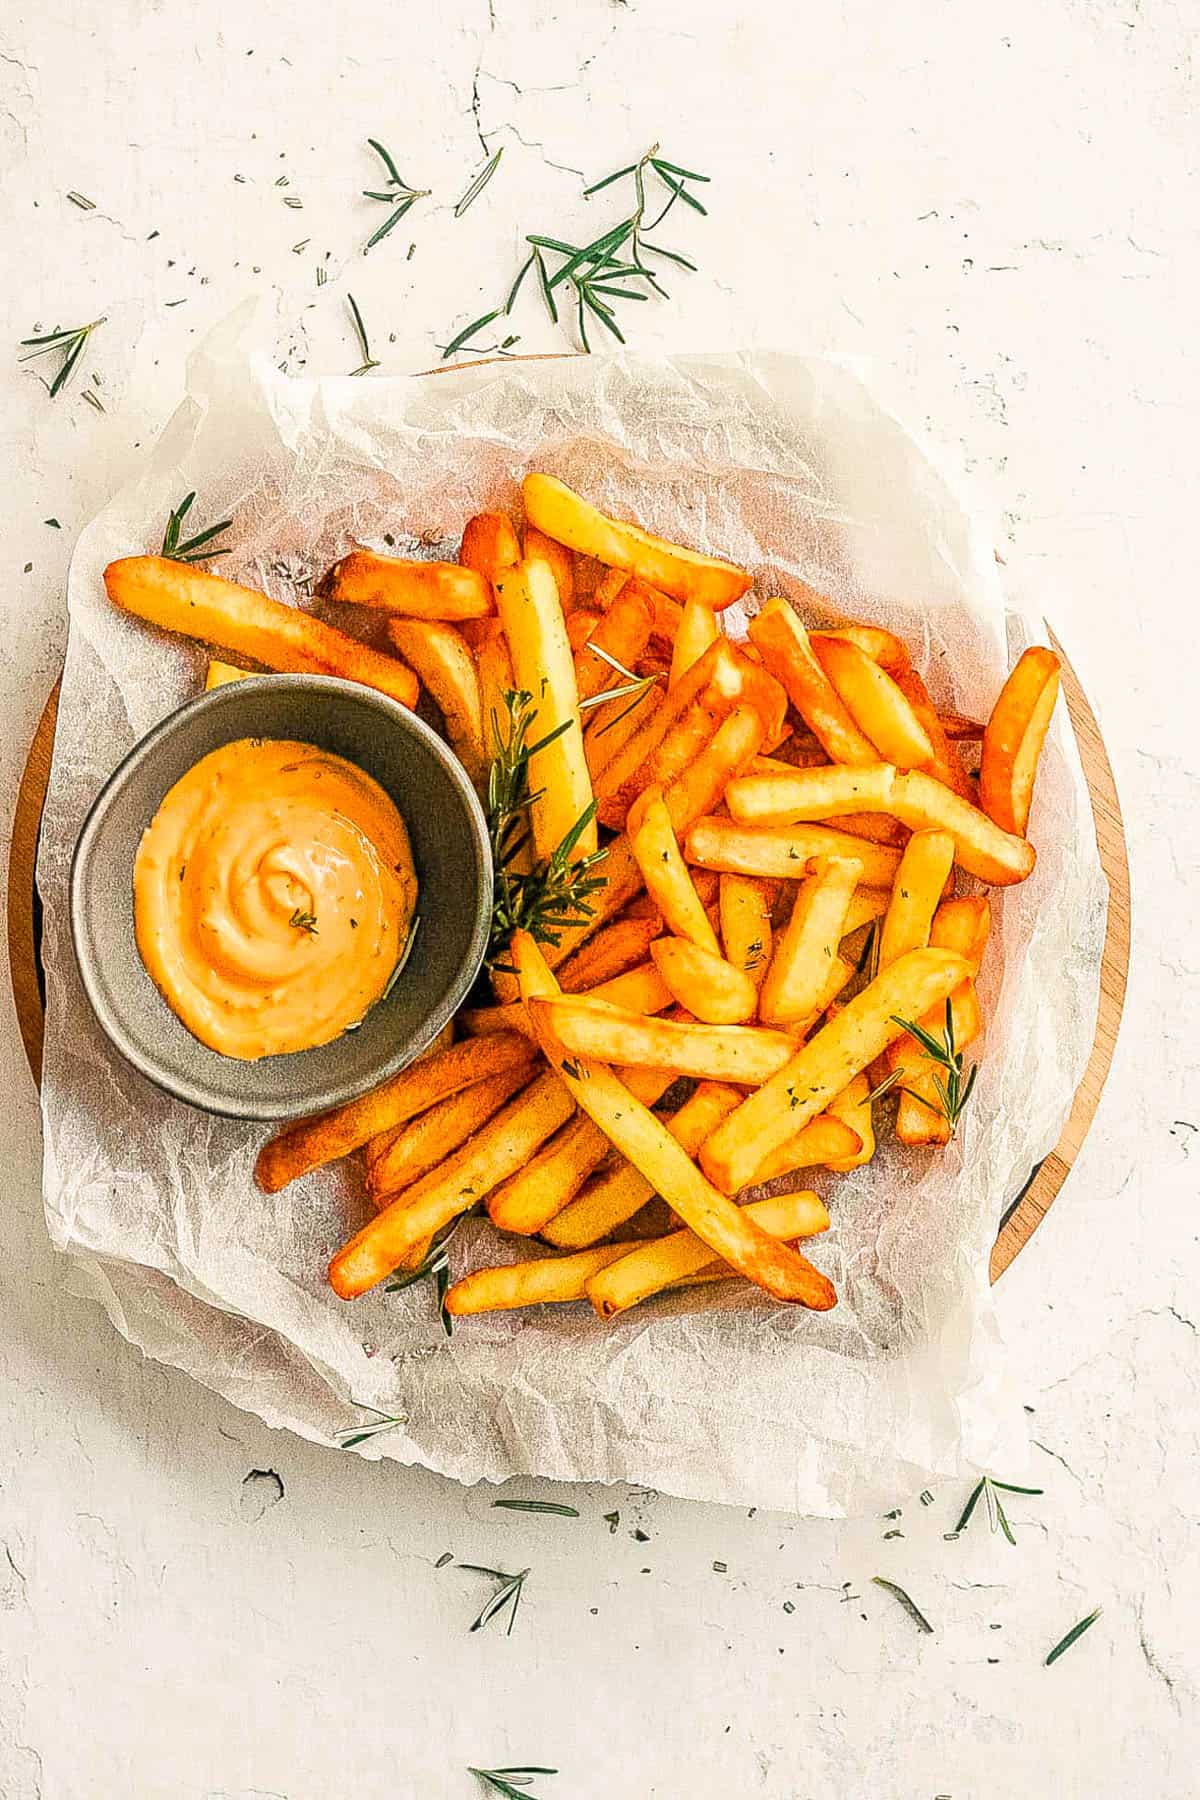 Air fryer frozen french fries on a white plate with dipping sauce on the side.